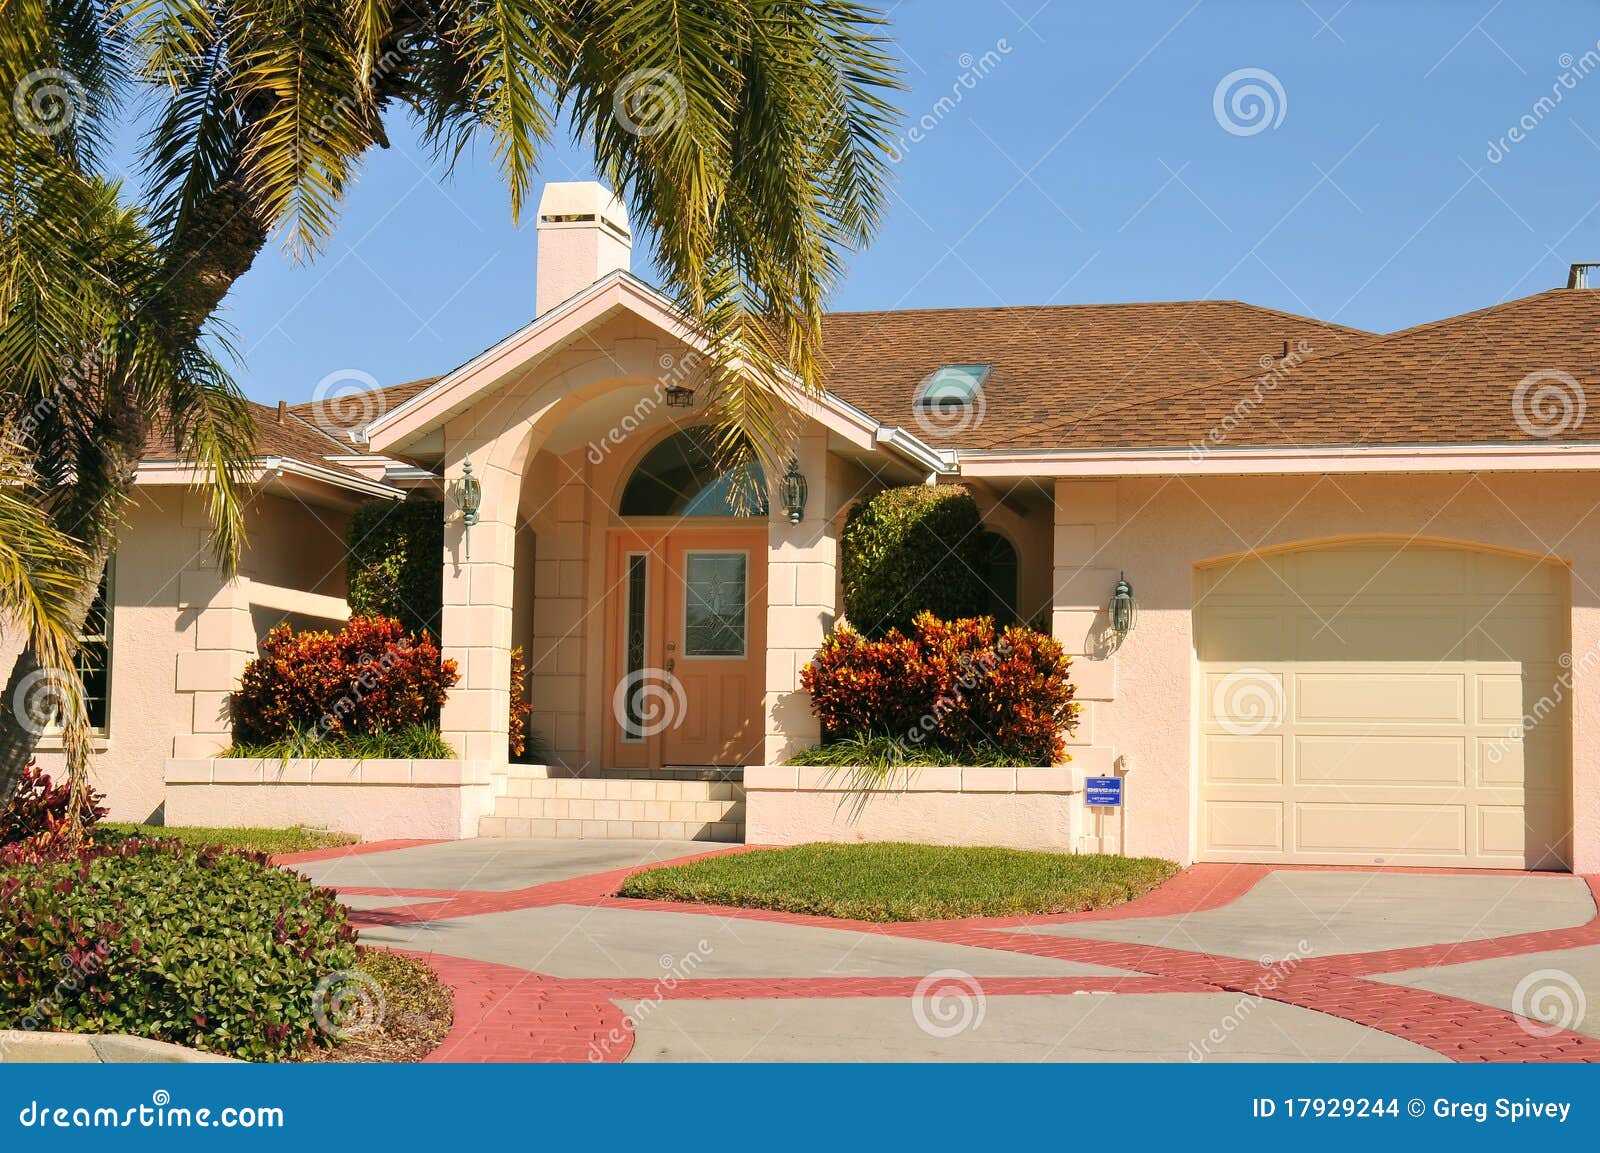 Modern Ranch style home stock photo. Image of exterior - 17929244